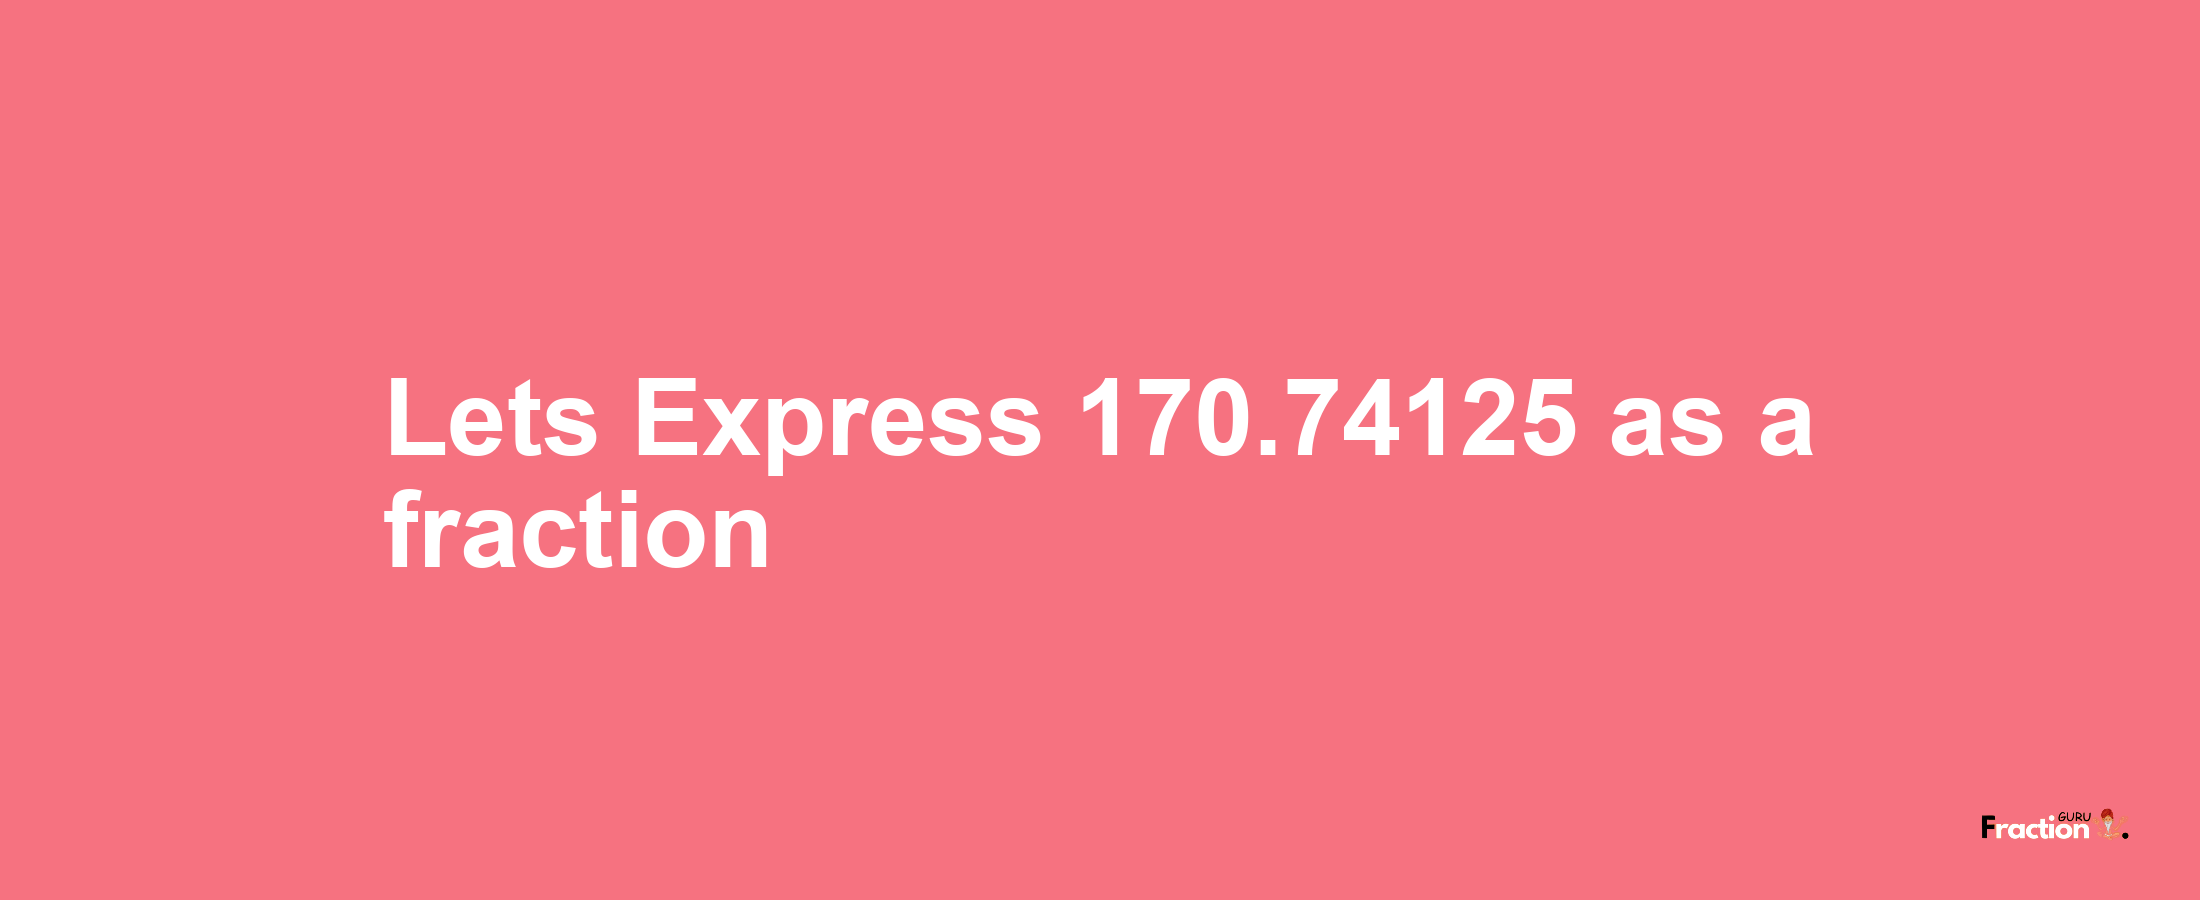 Lets Express 170.74125 as afraction